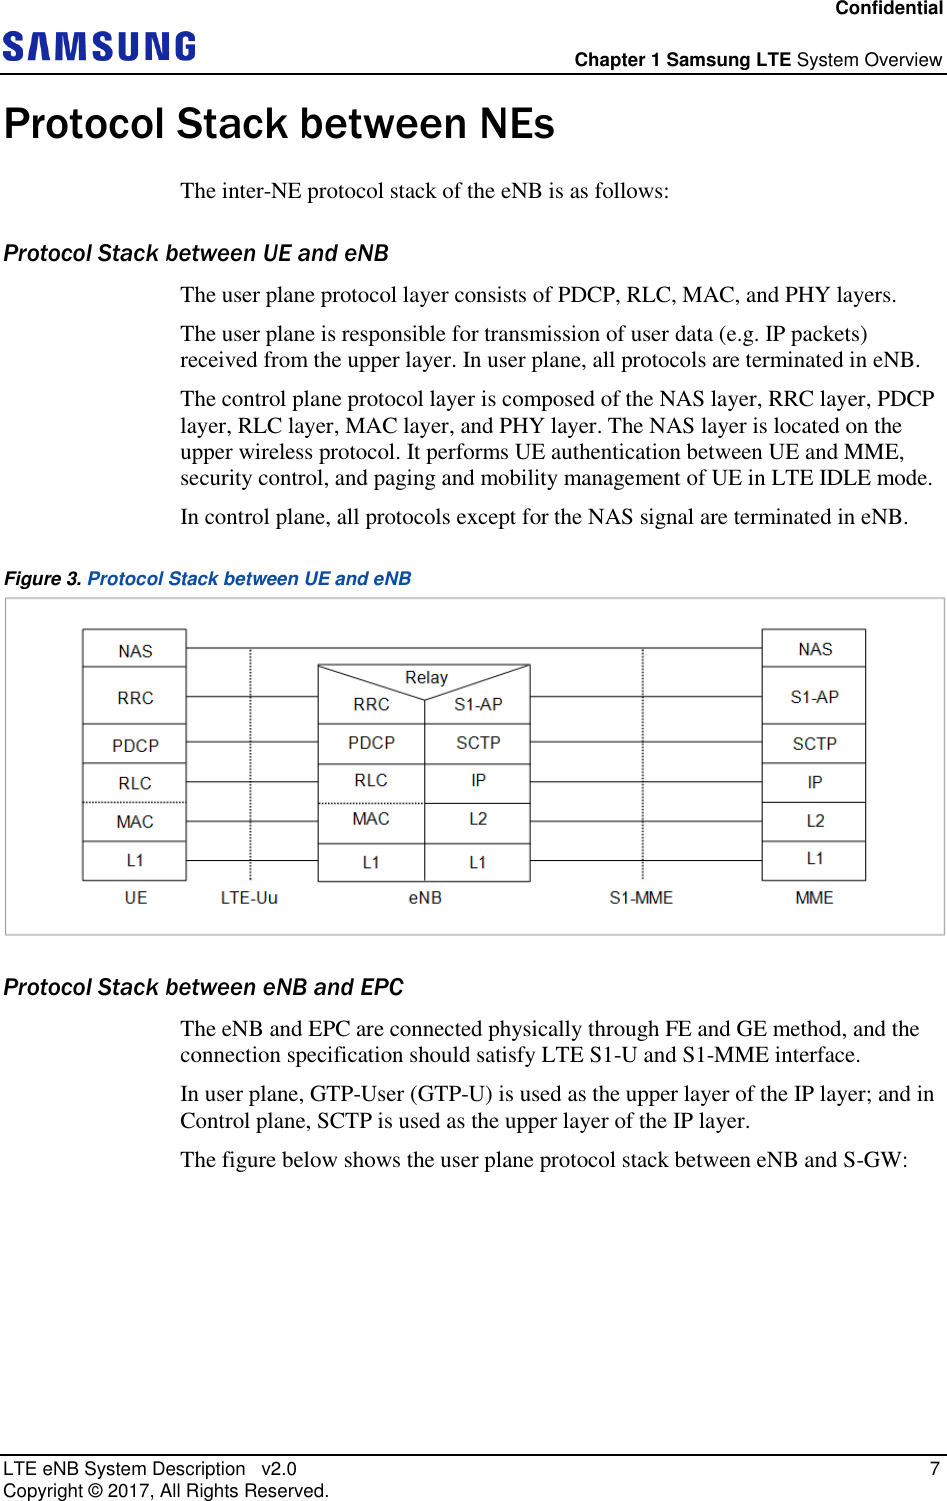 Confidential  Chapter 1 Samsung LTE System Overview LTE eNB System Description   v2.0    7 Copyright ©  2017, All Rights Reserved. Protocol Stack between NEs The inter-NE protocol stack of the eNB is as follows: Protocol Stack between UE and eNB The user plane protocol layer consists of PDCP, RLC, MAC, and PHY layers. The user plane is responsible for transmission of user data (e.g. IP packets) received from the upper layer. In user plane, all protocols are terminated in eNB. The control plane protocol layer is composed of the NAS layer, RRC layer, PDCP layer, RLC layer, MAC layer, and PHY layer. The NAS layer is located on the upper wireless protocol. It performs UE authentication between UE and MME, security control, and paging and mobility management of UE in LTE IDLE mode. In control plane, all protocols except for the NAS signal are terminated in eNB. Figure 3. Protocol Stack between UE and eNB  Protocol Stack between eNB and EPC The eNB and EPC are connected physically through FE and GE method, and the connection specification should satisfy LTE S1-U and S1-MME interface. In user plane, GTP-User (GTP-U) is used as the upper layer of the IP layer; and in Control plane, SCTP is used as the upper layer of the IP layer. The figure below shows the user plane protocol stack between eNB and S-GW: 